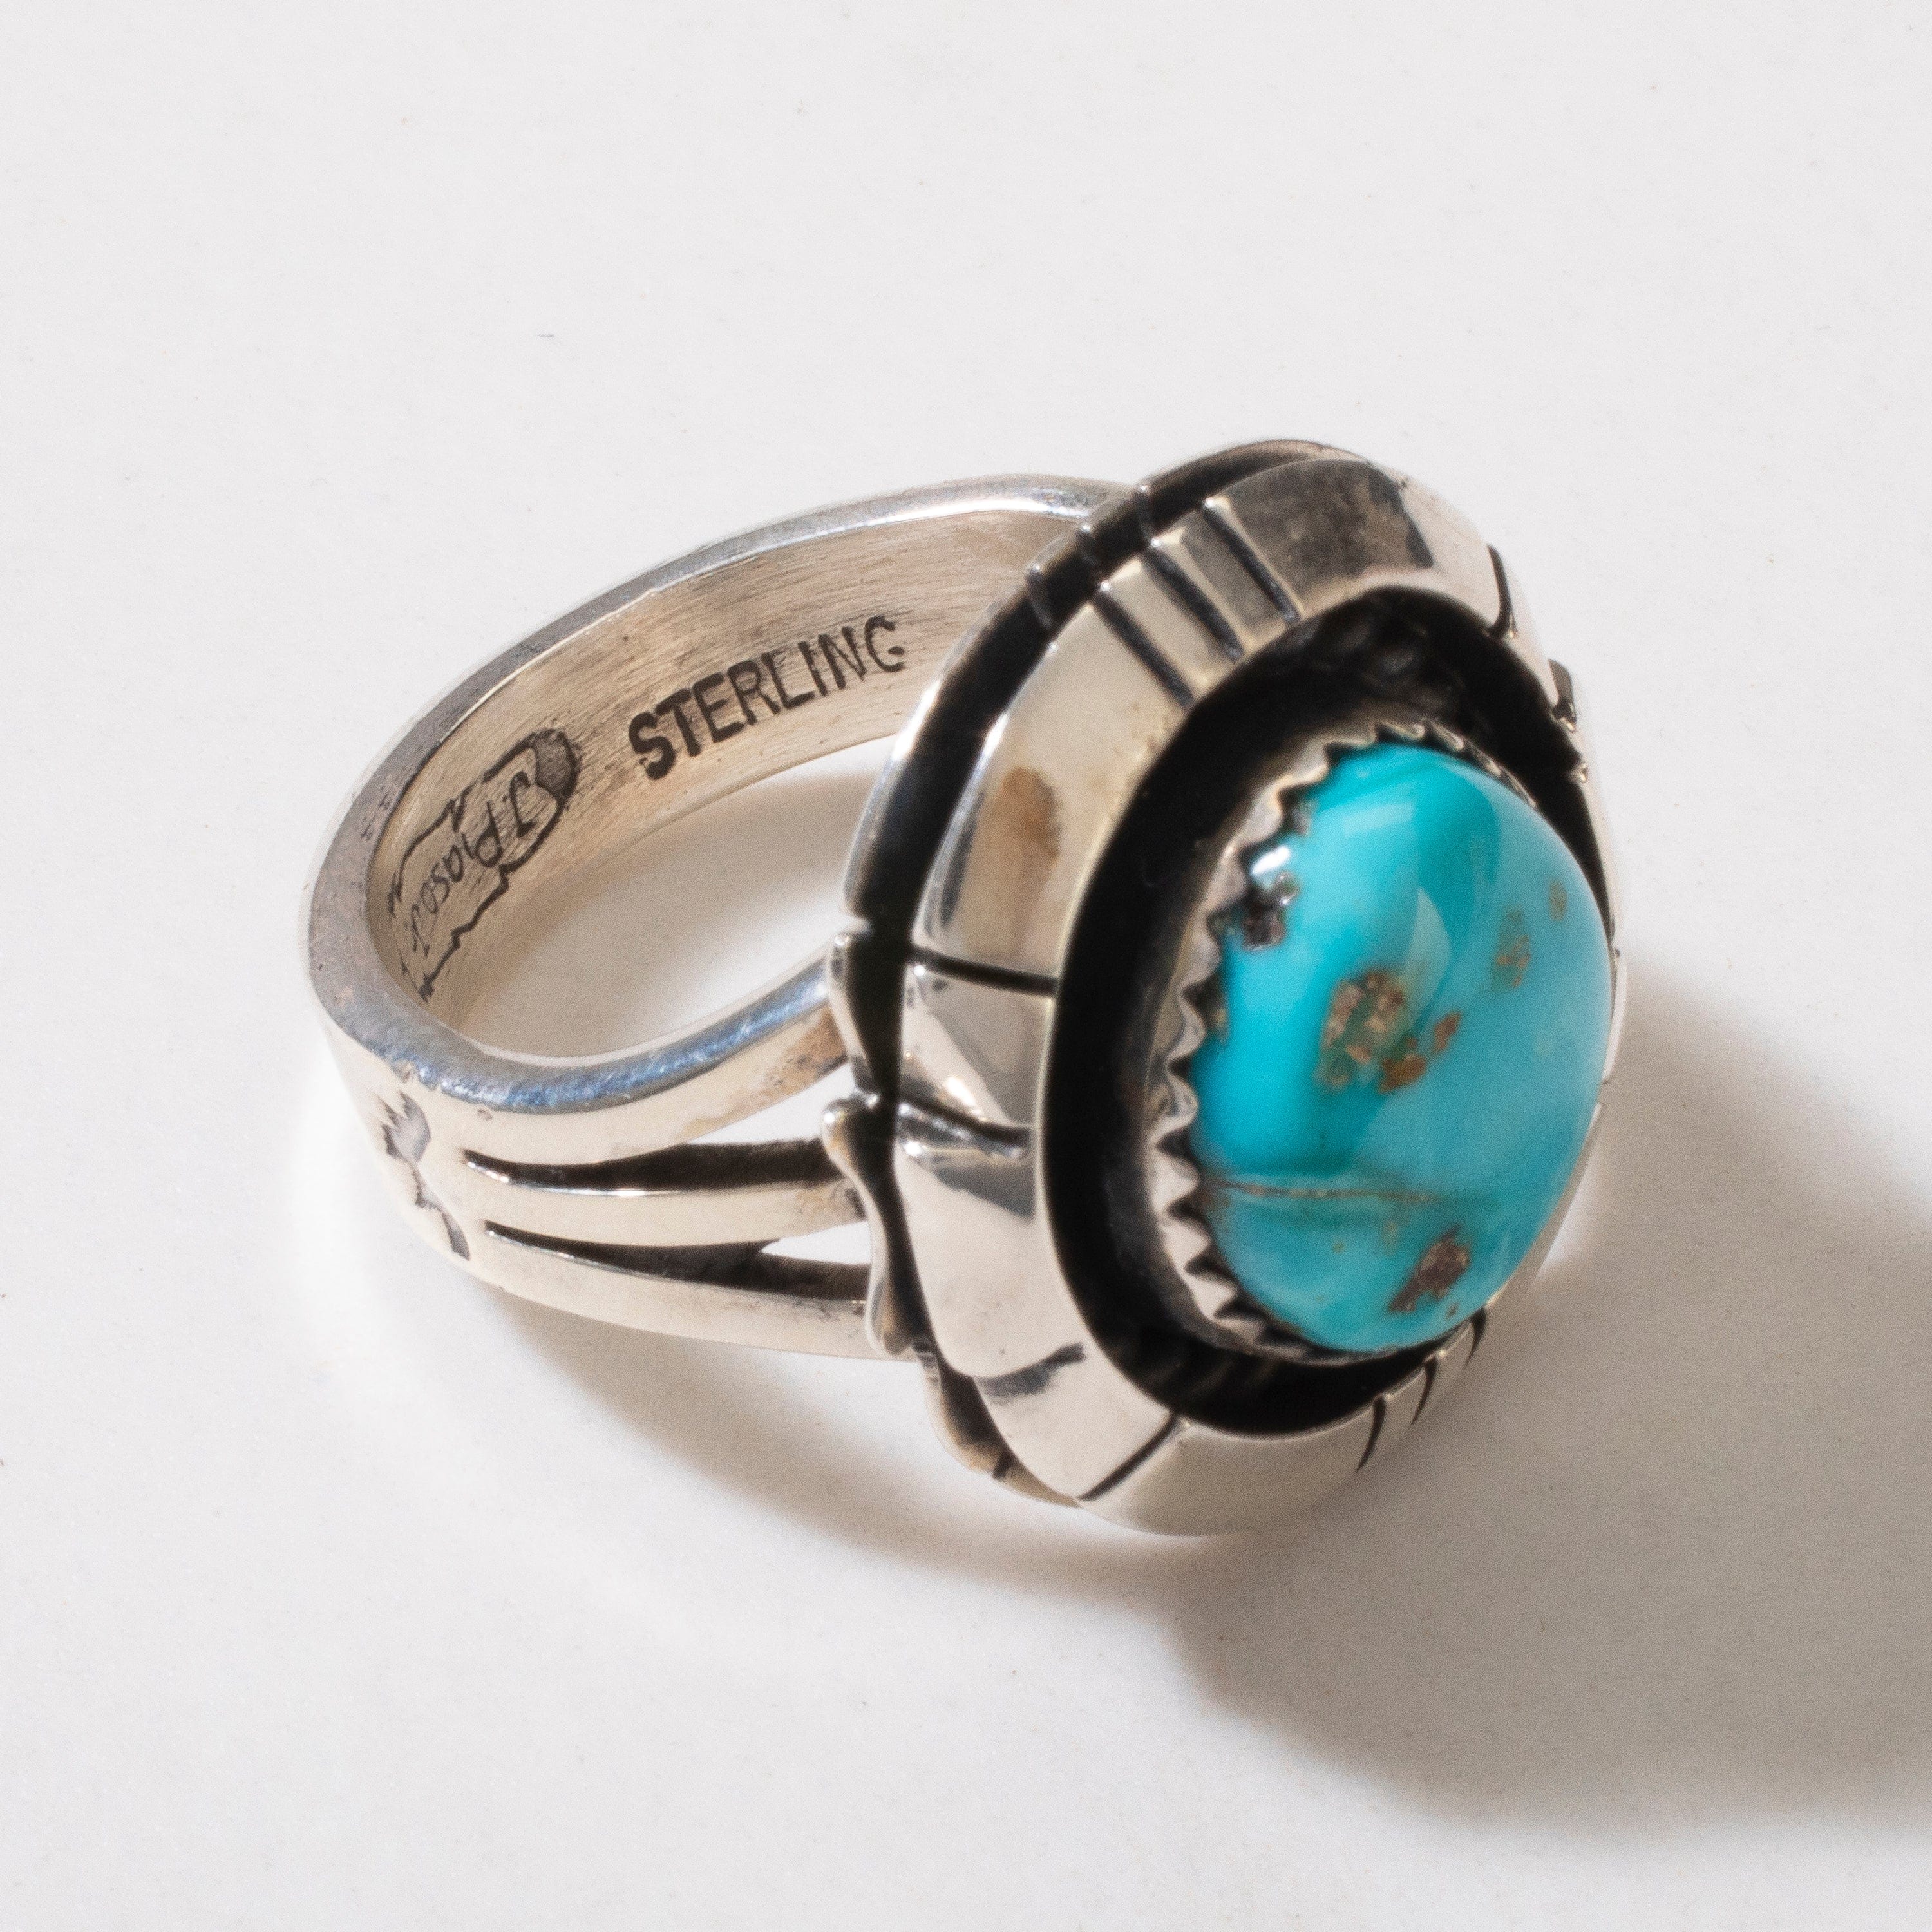 Kalifano Native American Jewelry 6 Joe Piaso Jr. Sleeping Beauty Turquoise Feather Navajo USA Native American Made 925 Sterling Silver Ring NAR600.052.6